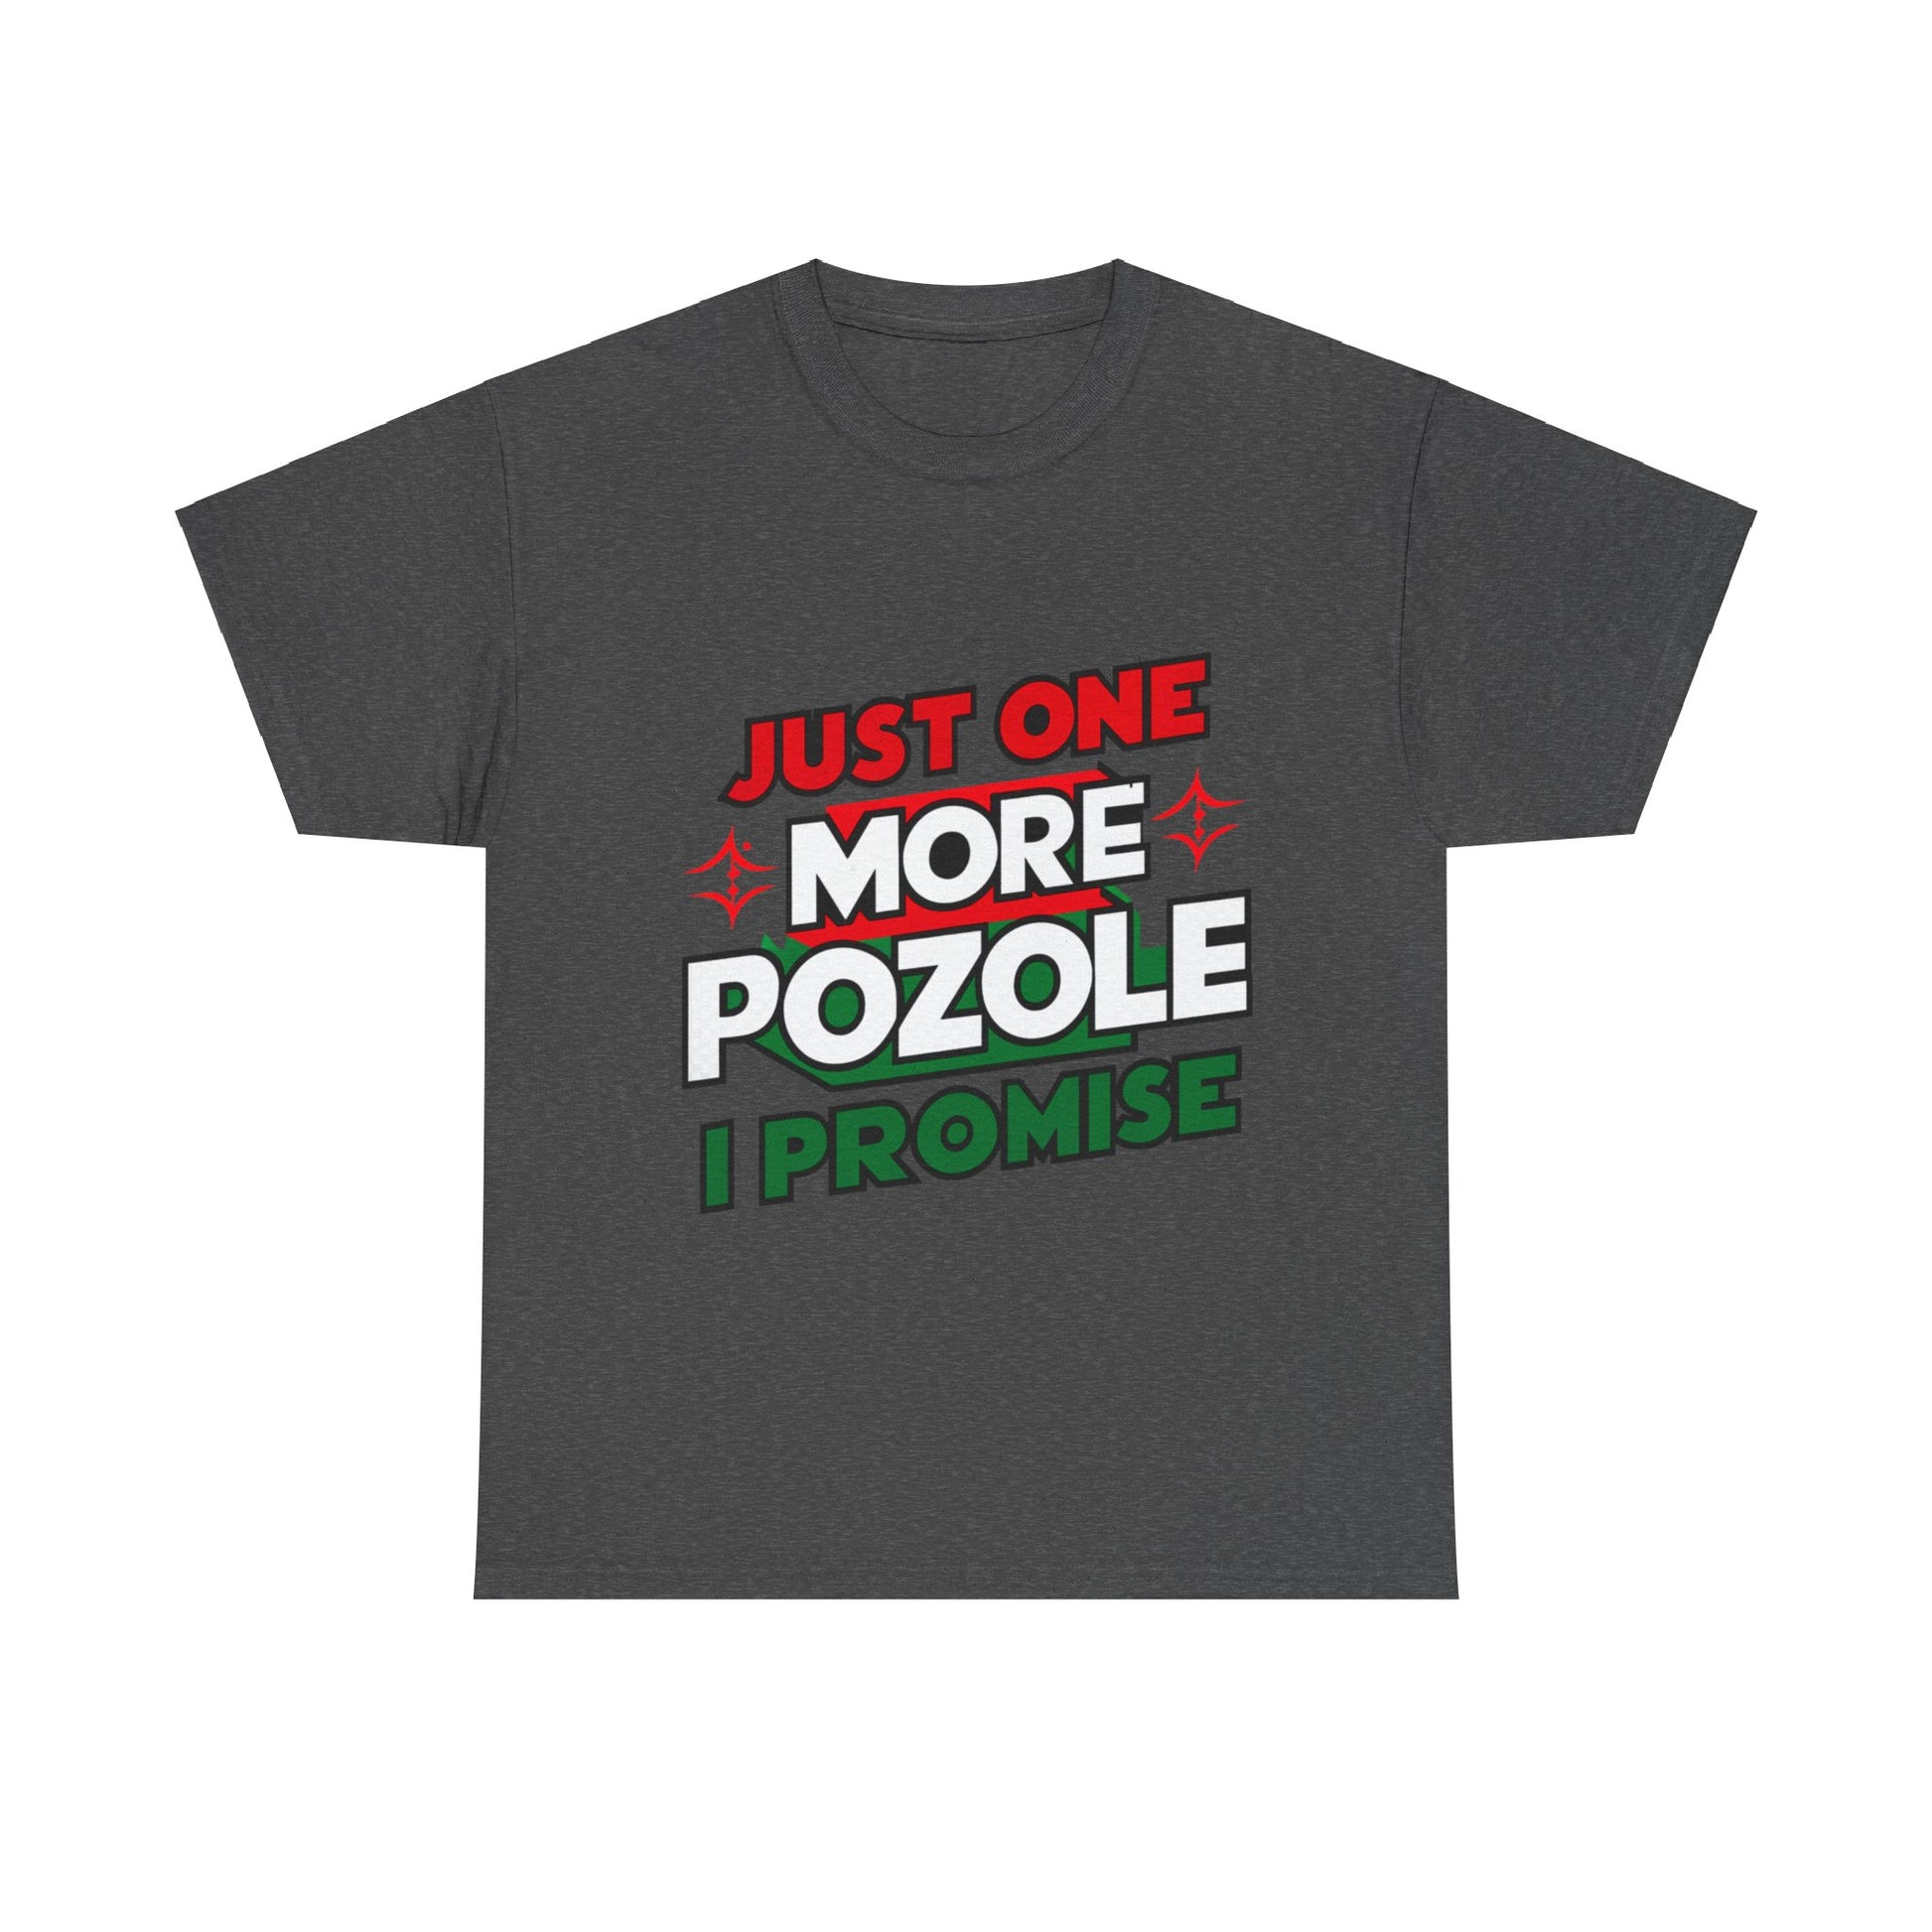 Just One More Pozole I Promise Mexican Food Graphic Unisex Heavy Cotton Tee Cotton Funny Humorous Graphic Soft Premium Unisex Men Women Dark Heather T-shirt Birthday Gift-4